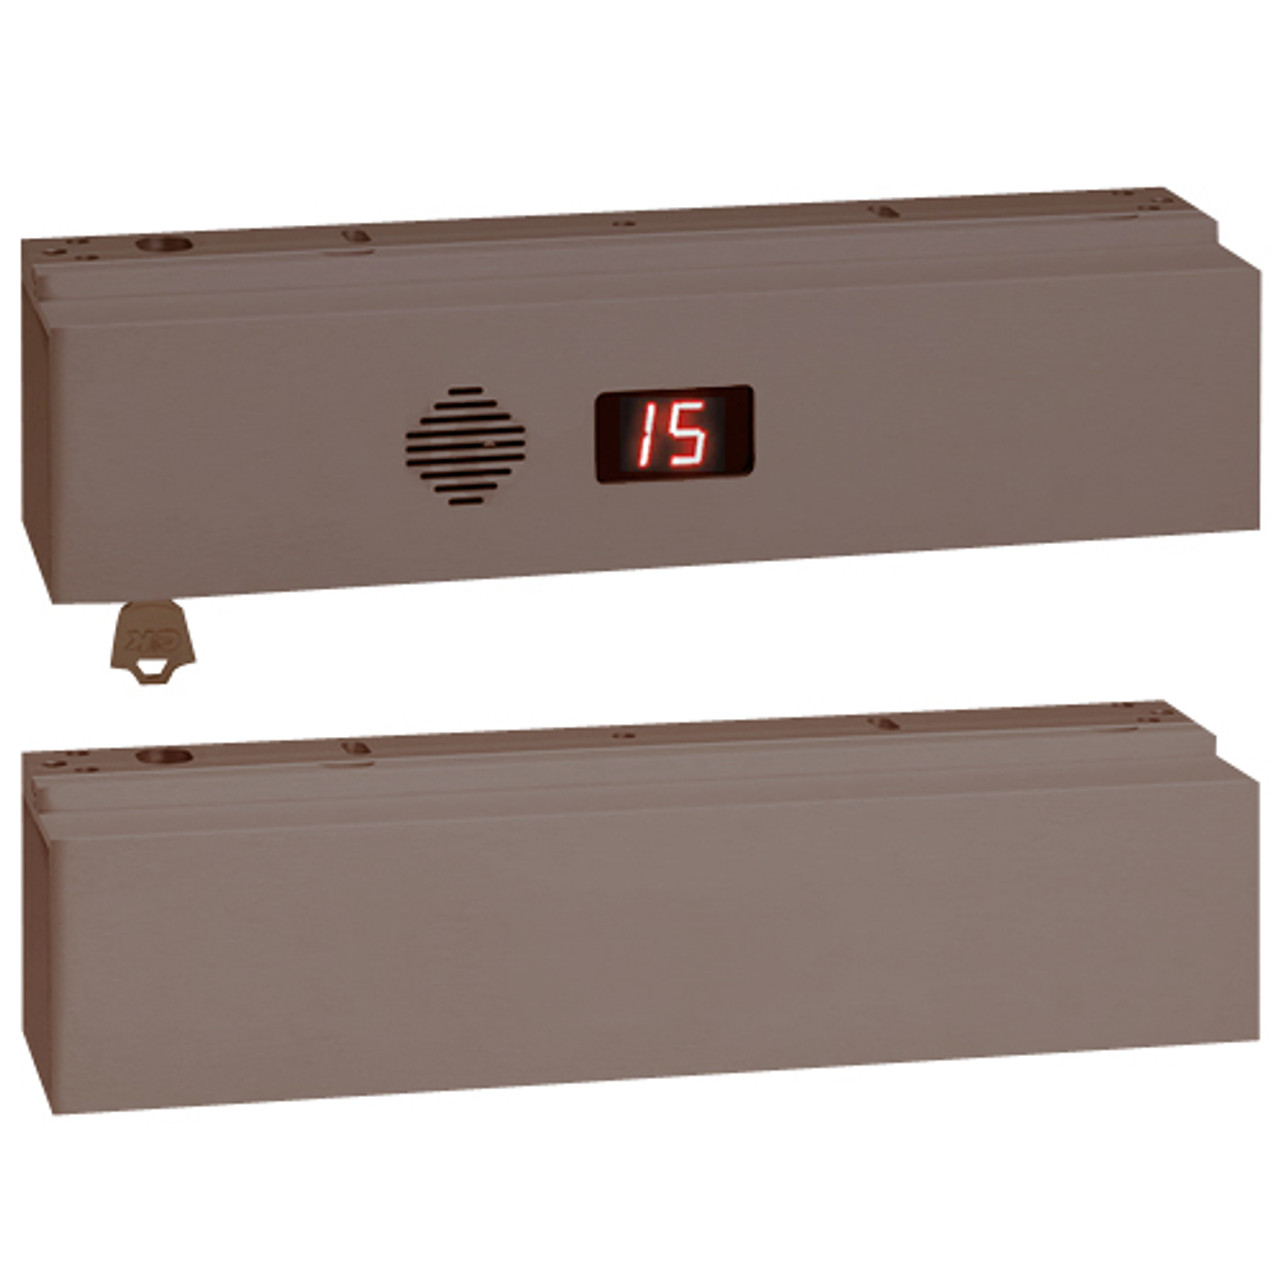 1511T-ND-L-X-D2B2A2 SDC 1511T Series Tandem Integrated Delayed Egress Locks with Door Position Status and Magnetic Bond Sensor in Dark Bronze